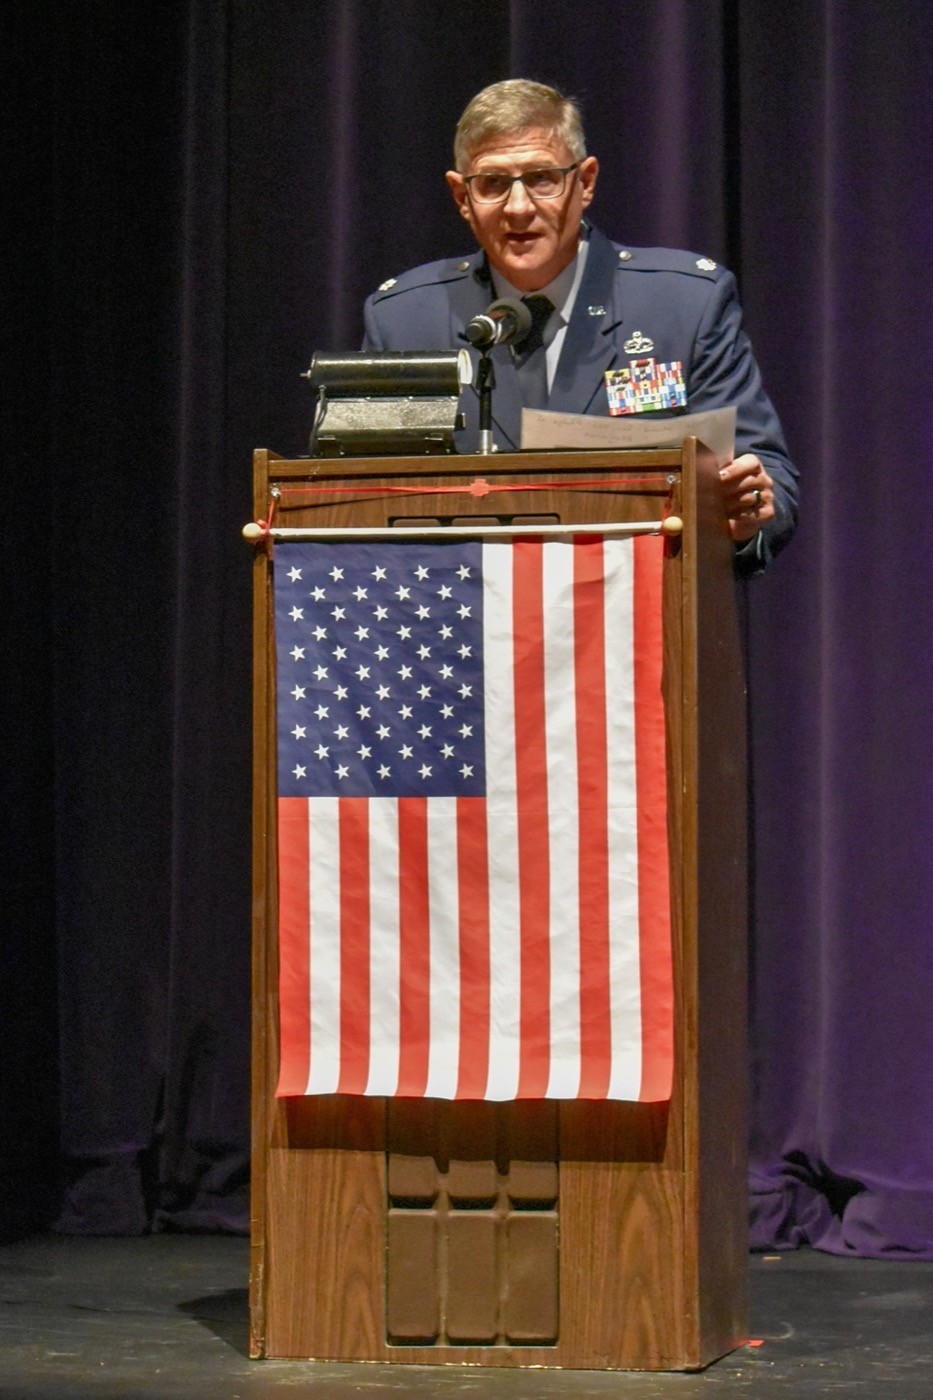 Military officer at podium